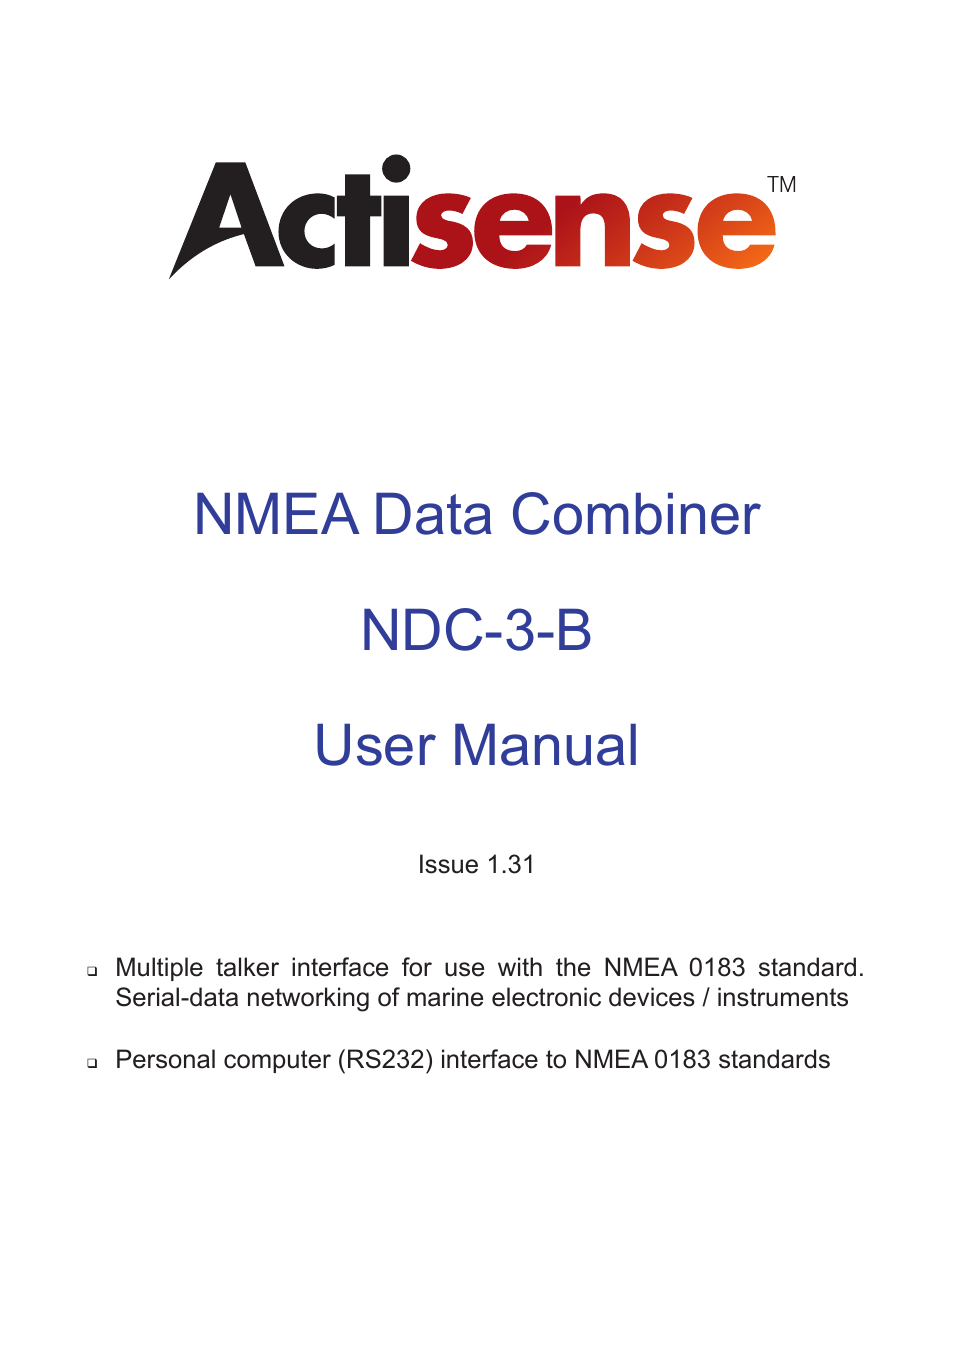 NDC comm NDC-3 User Manual | 12 pages